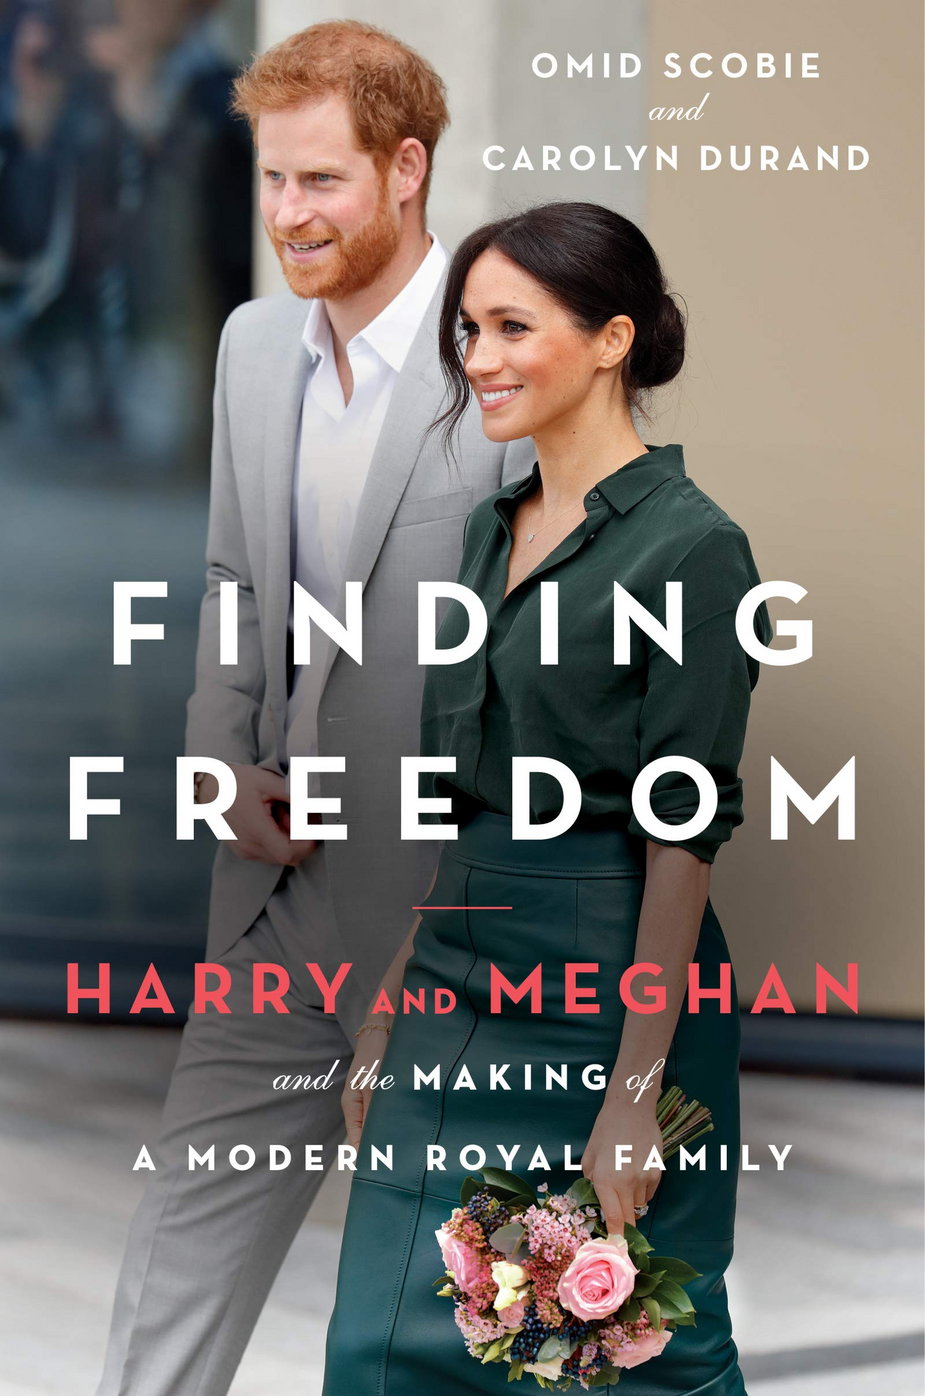 Omid Scobie i Carolyn Durand, "Finding Freedom: Harry and Meghan and the Making of a Modern Royal Family" (okładka)